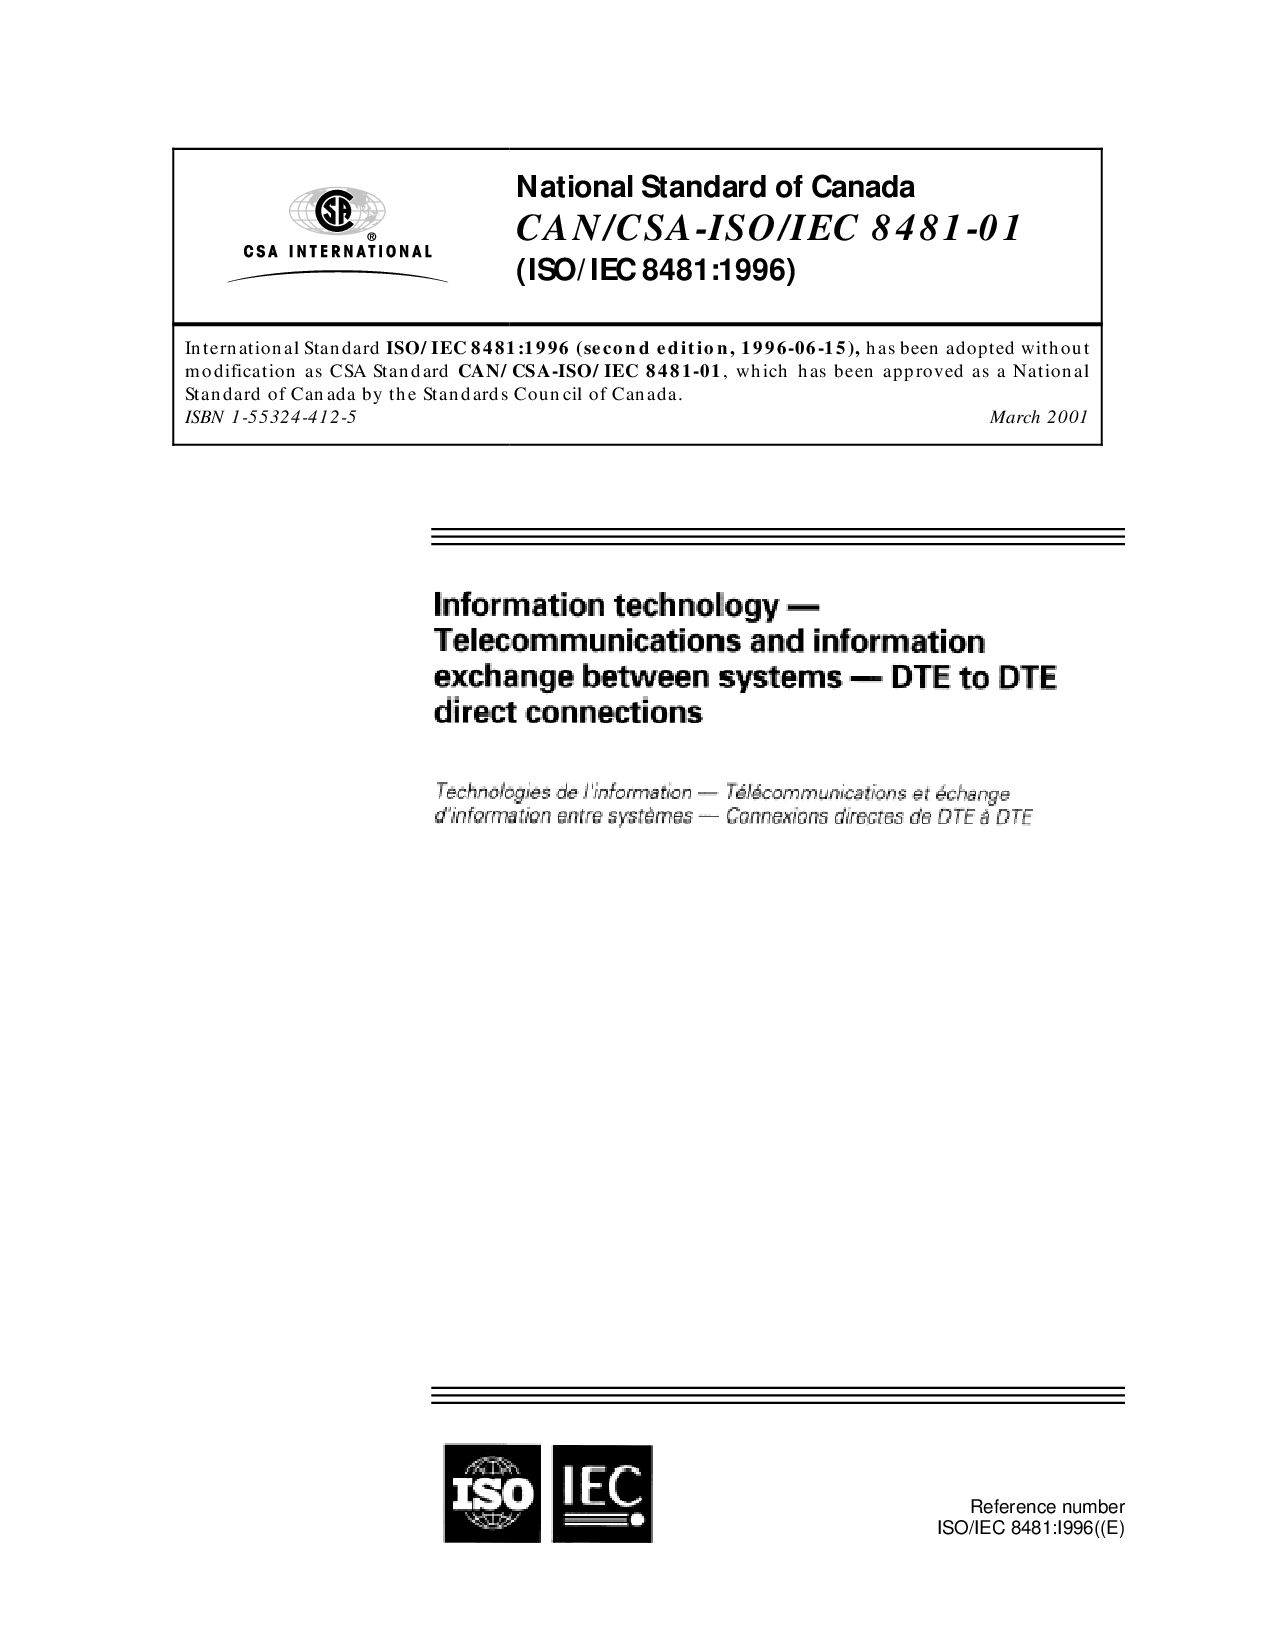 CAN/CSA-ISO/IEC 8481:2001